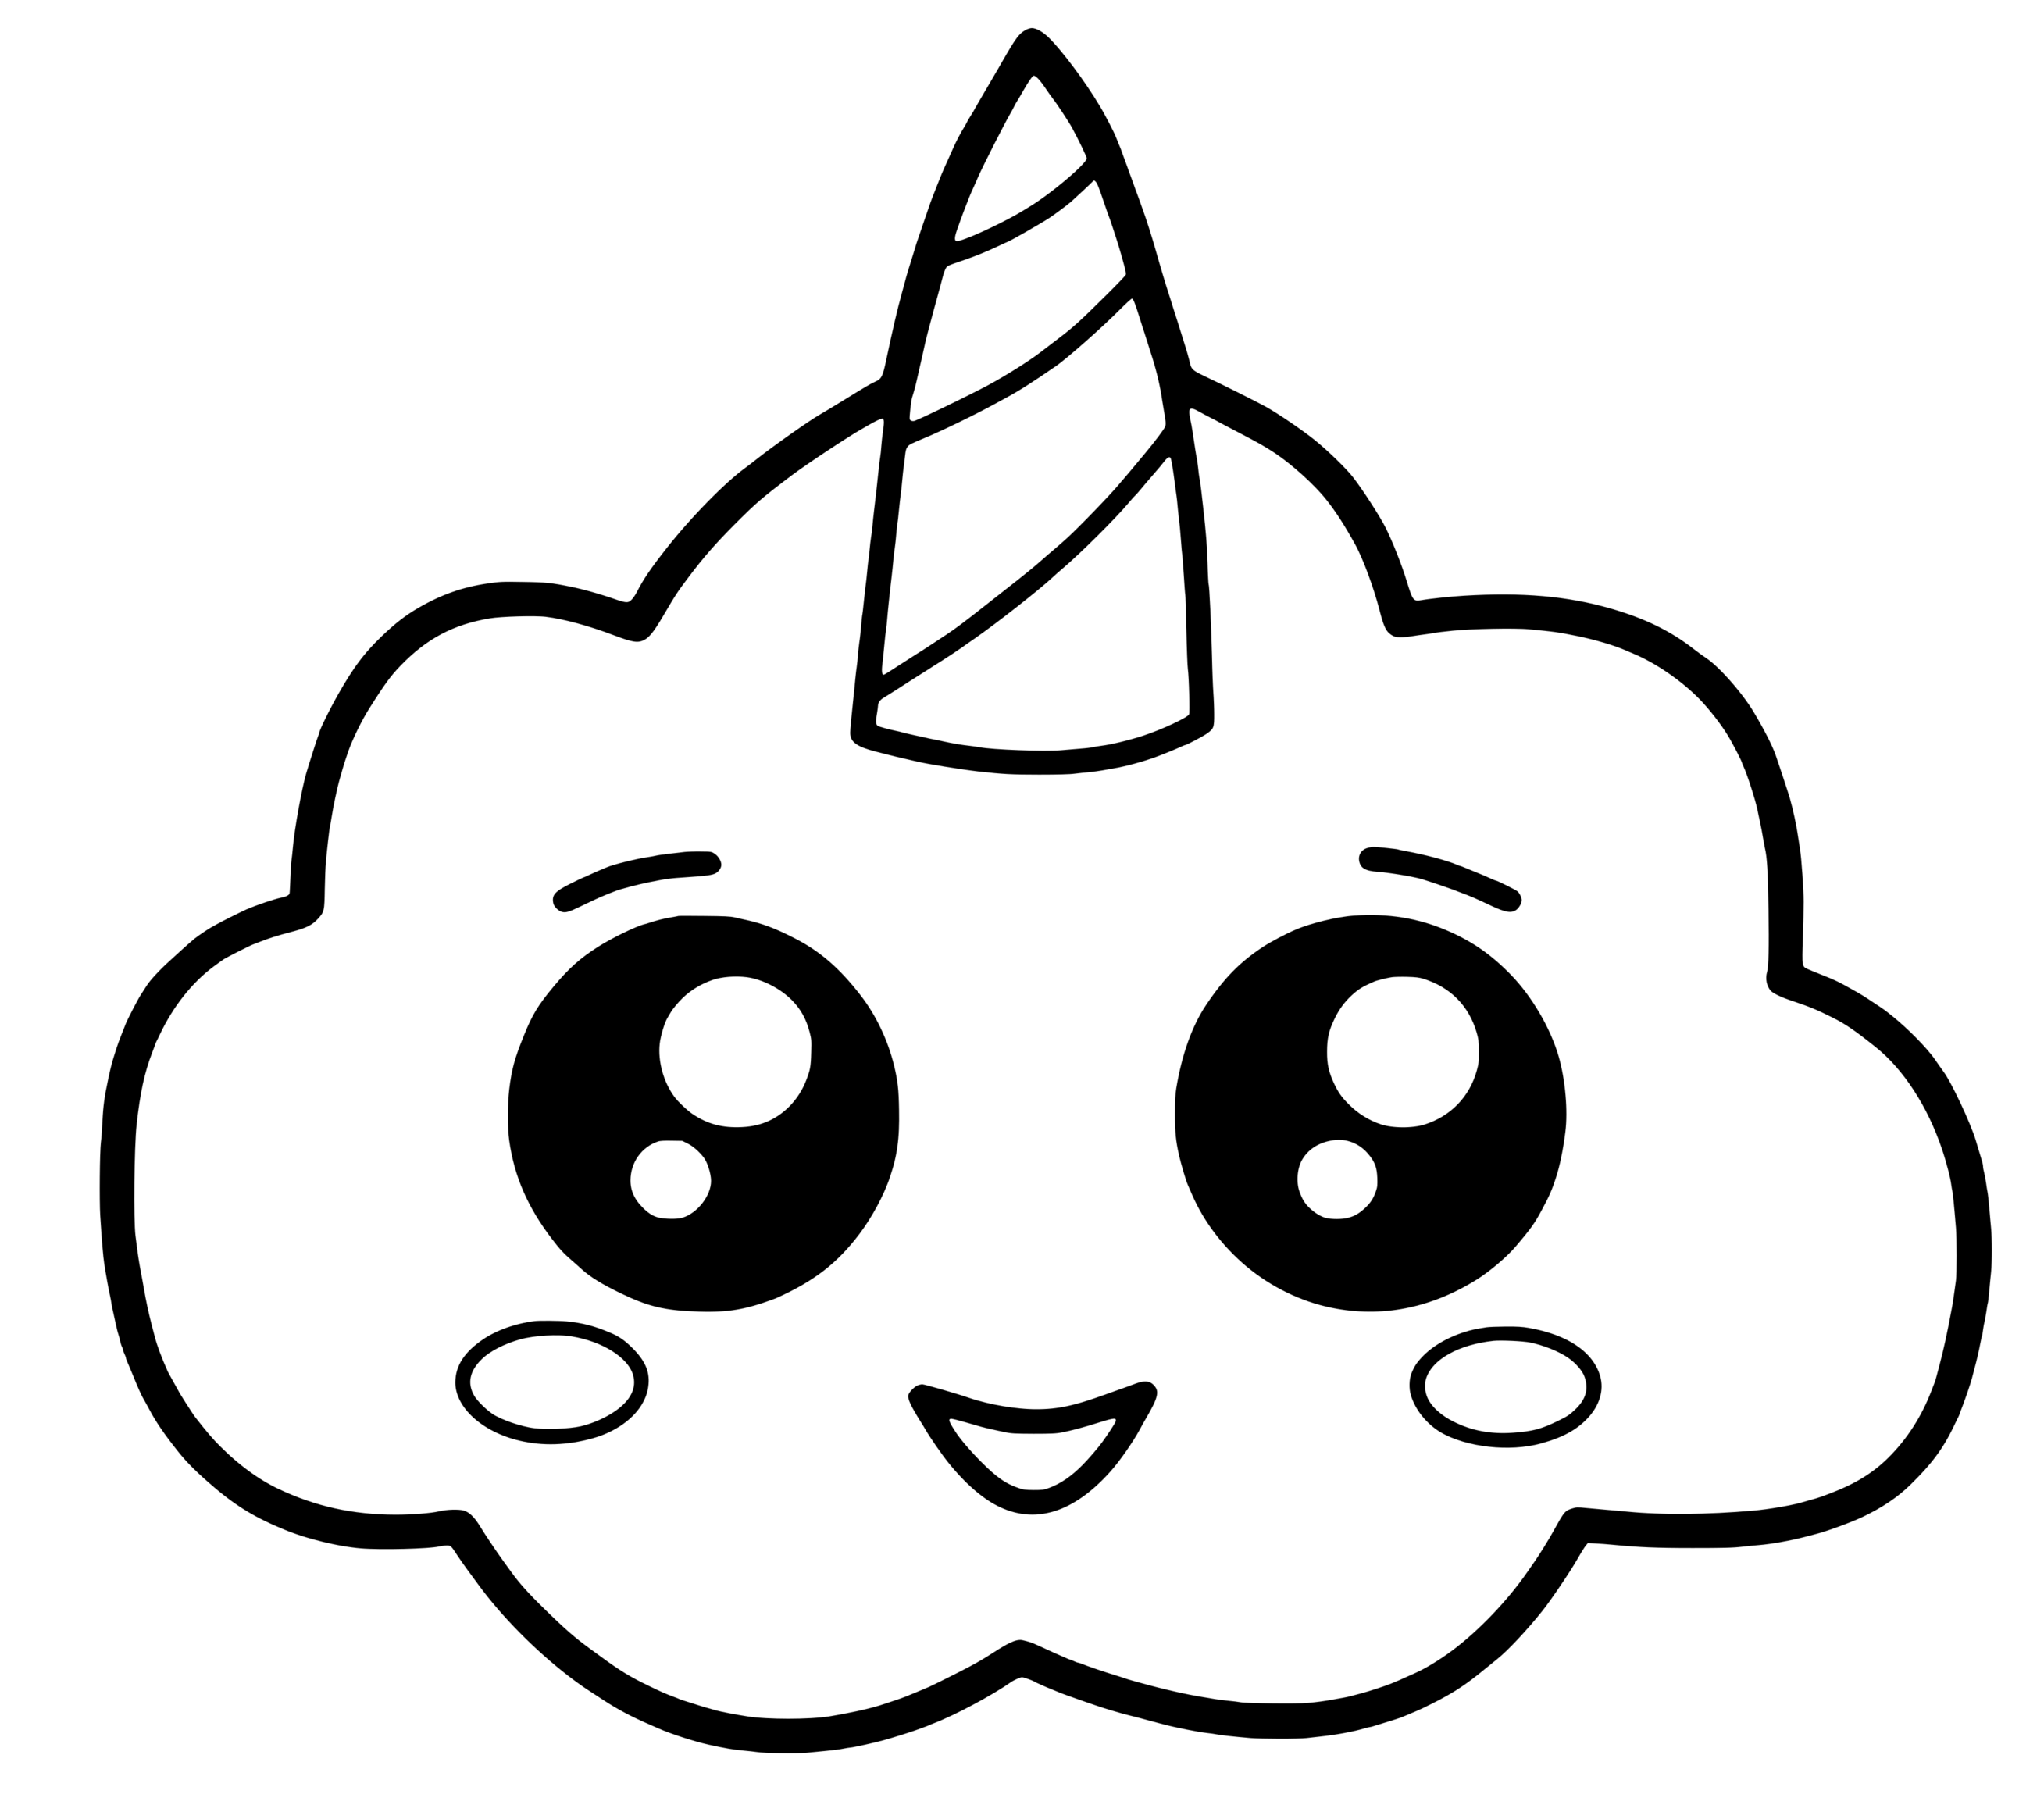 Unicorn Cloud Kawaii Coloring Pages   Coloring Cool